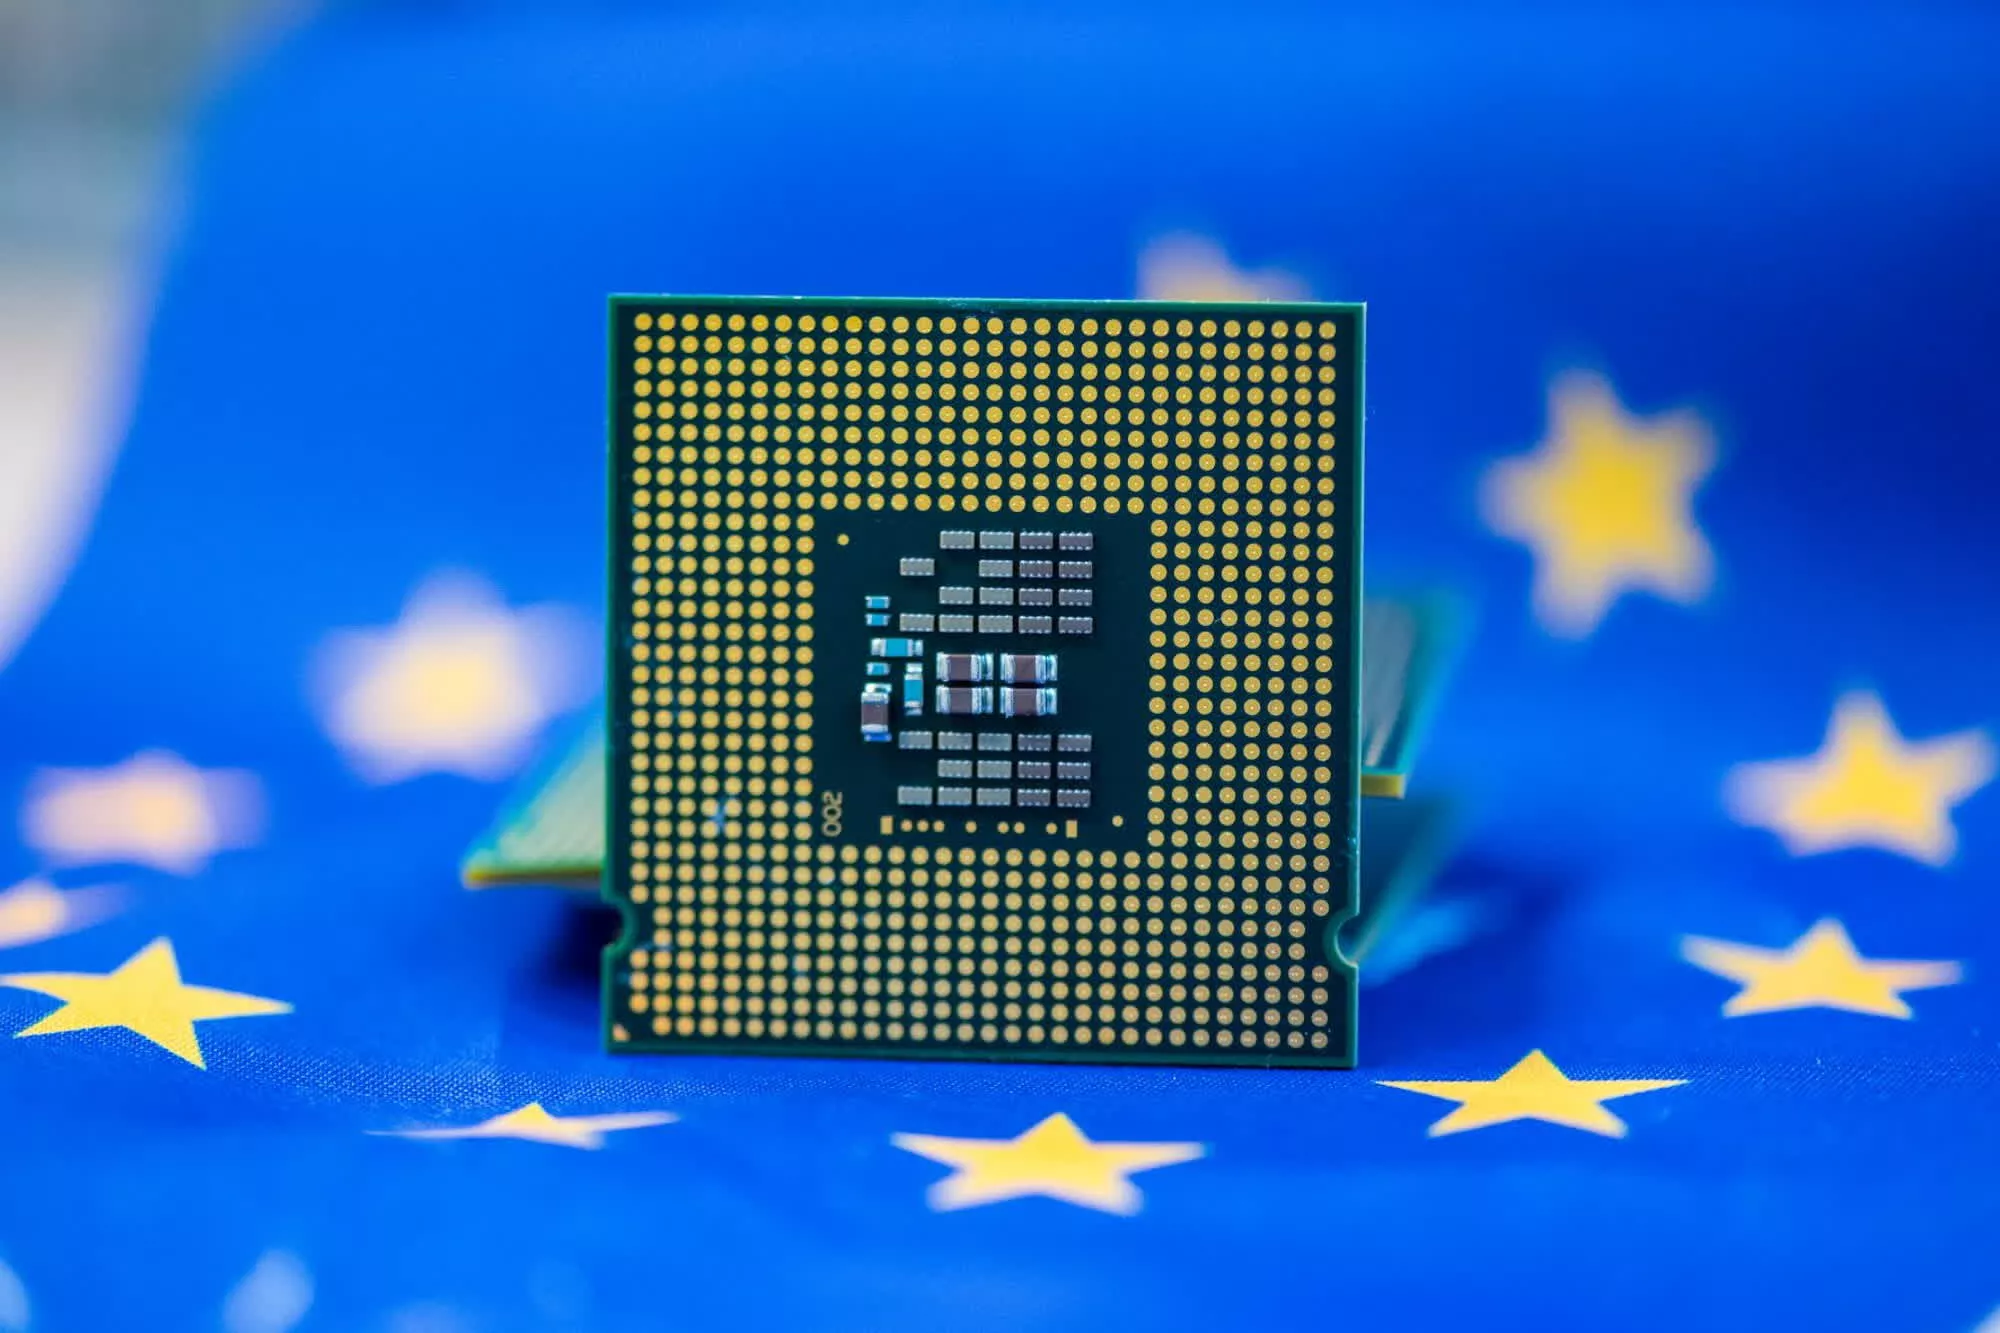 Europe will invest €43 billion to make its own microchips